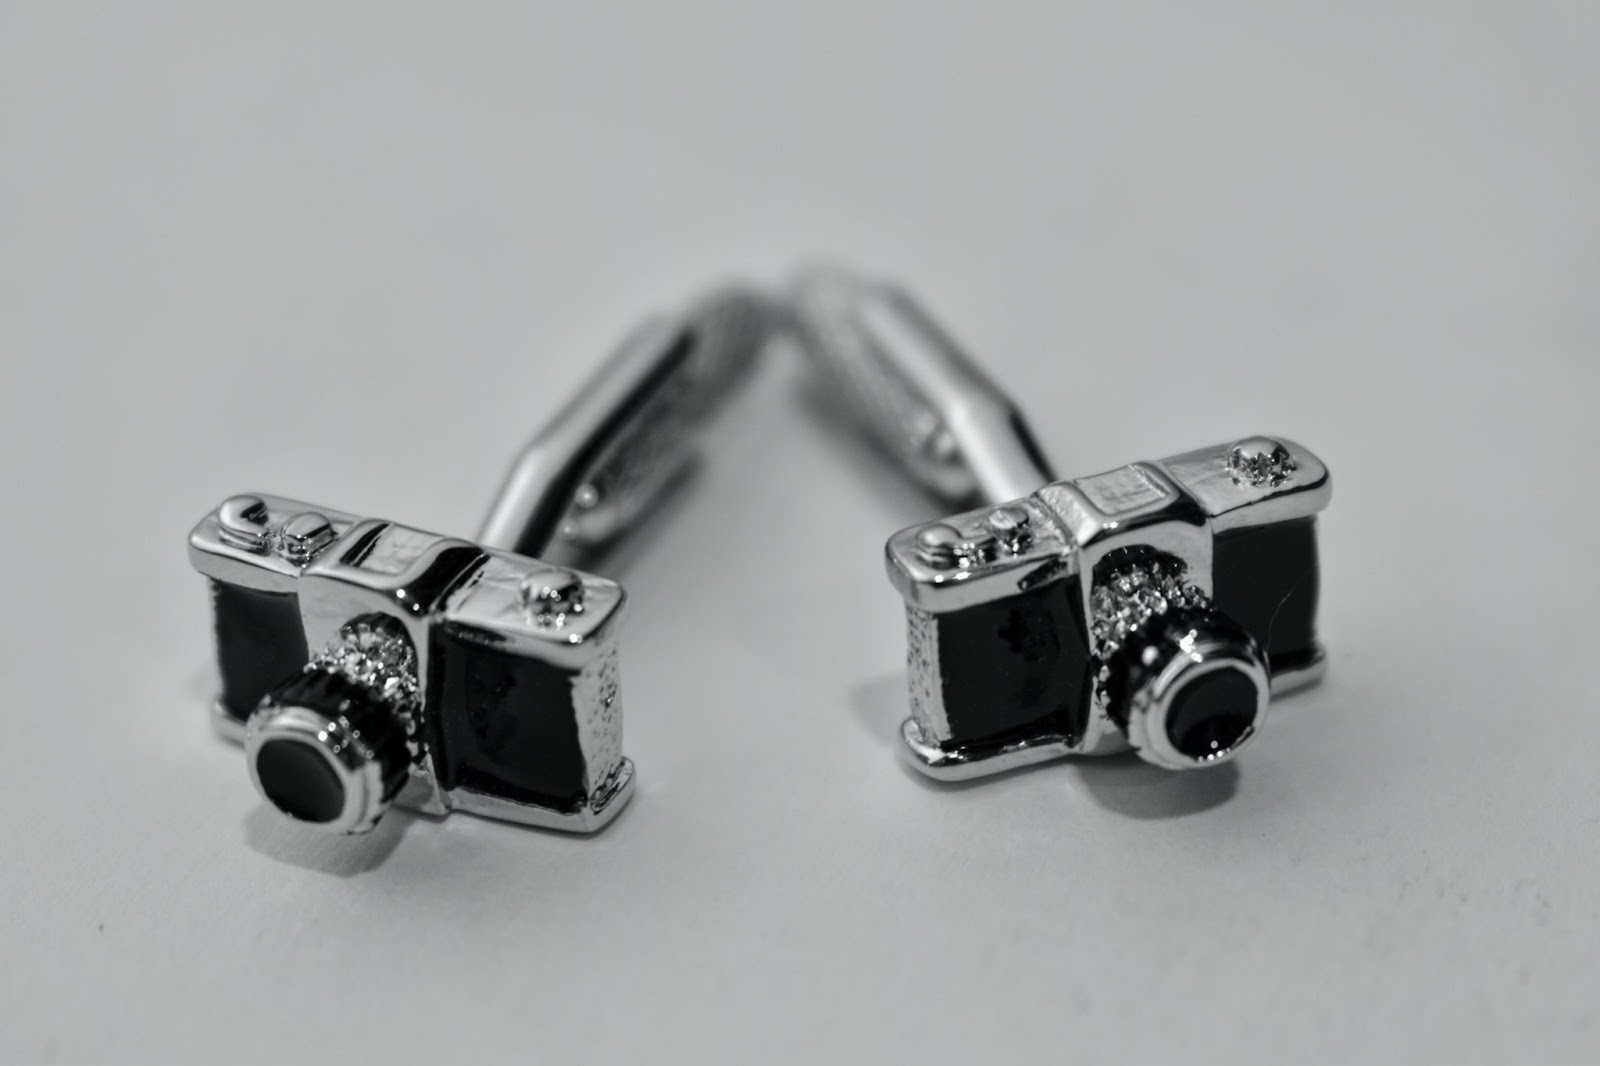 Cufflinks: How to Choose The Perfect Pair for Every Occasion.